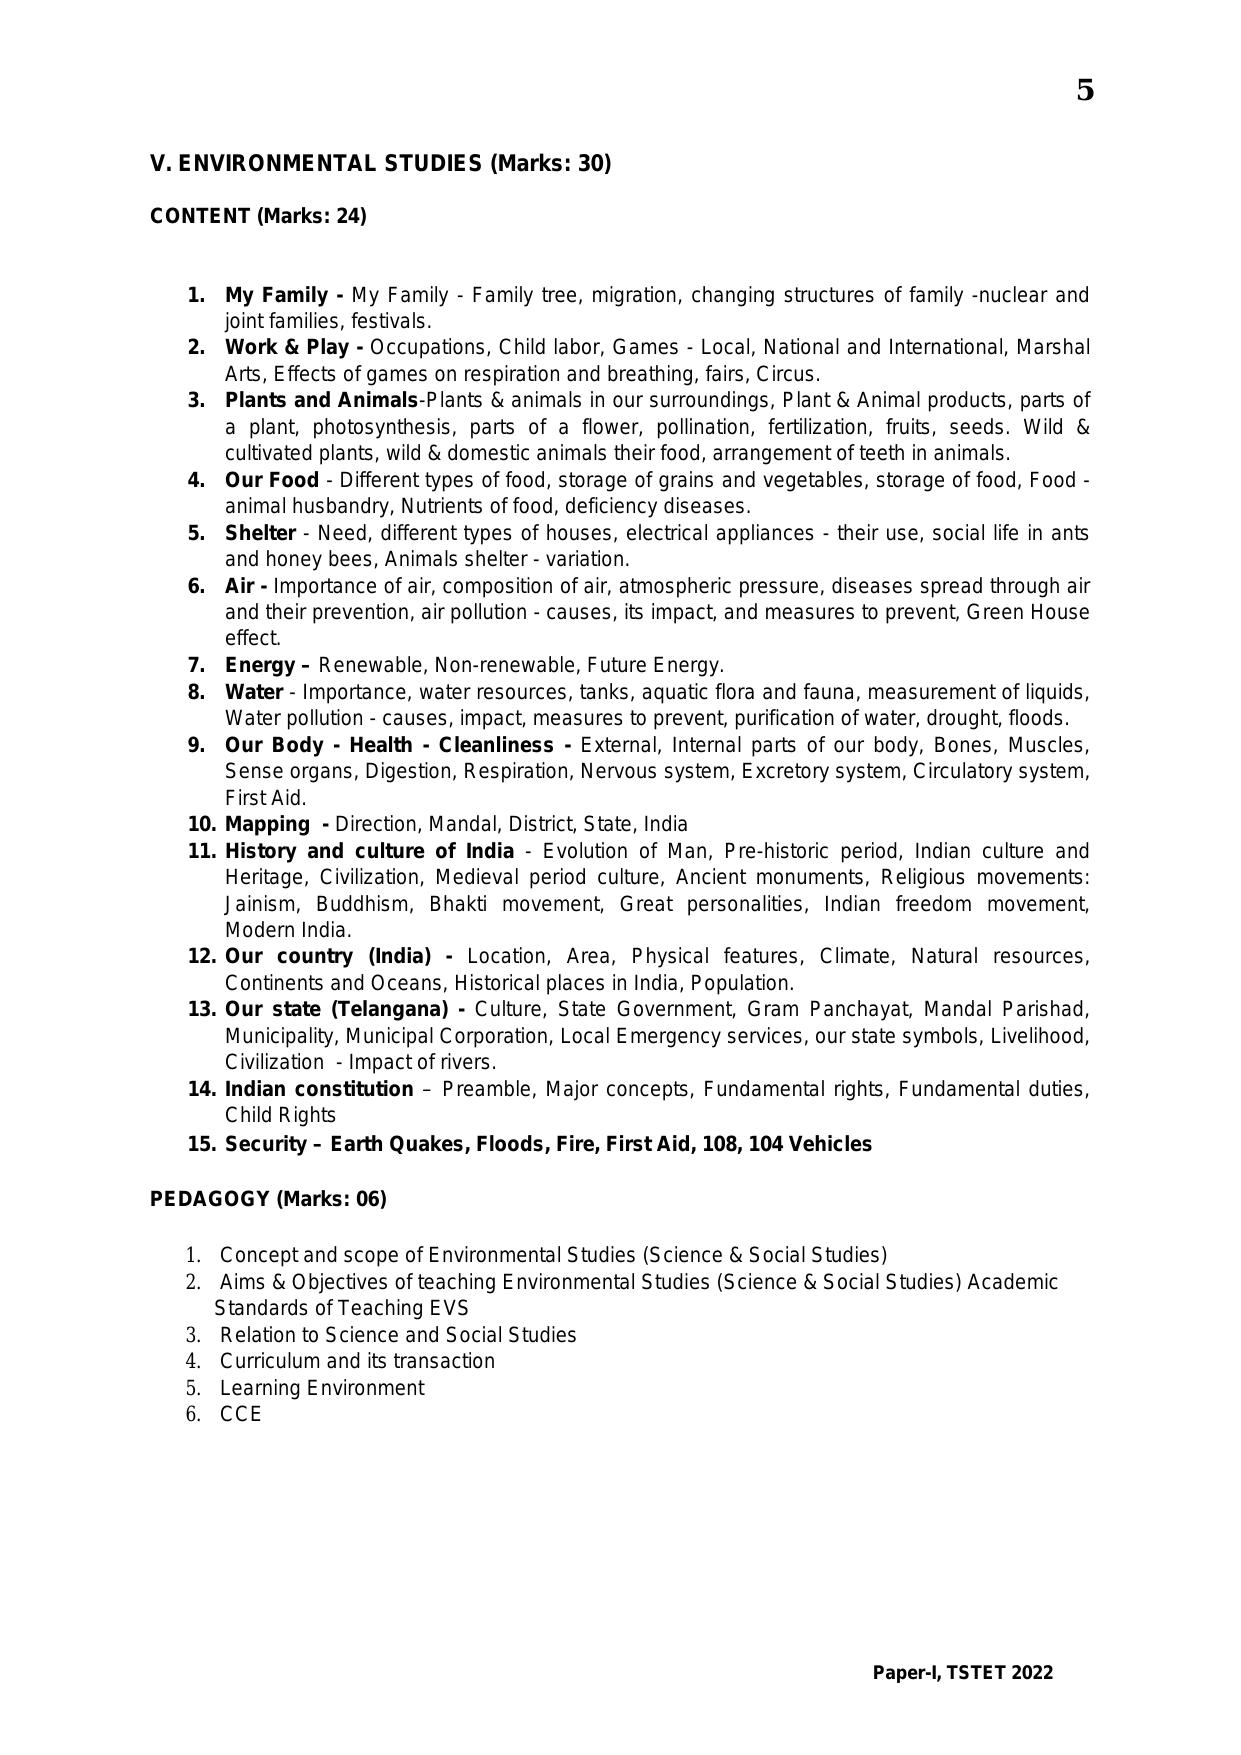 TS TET Syllabus for Paper 1 (Tamil) - Page 5